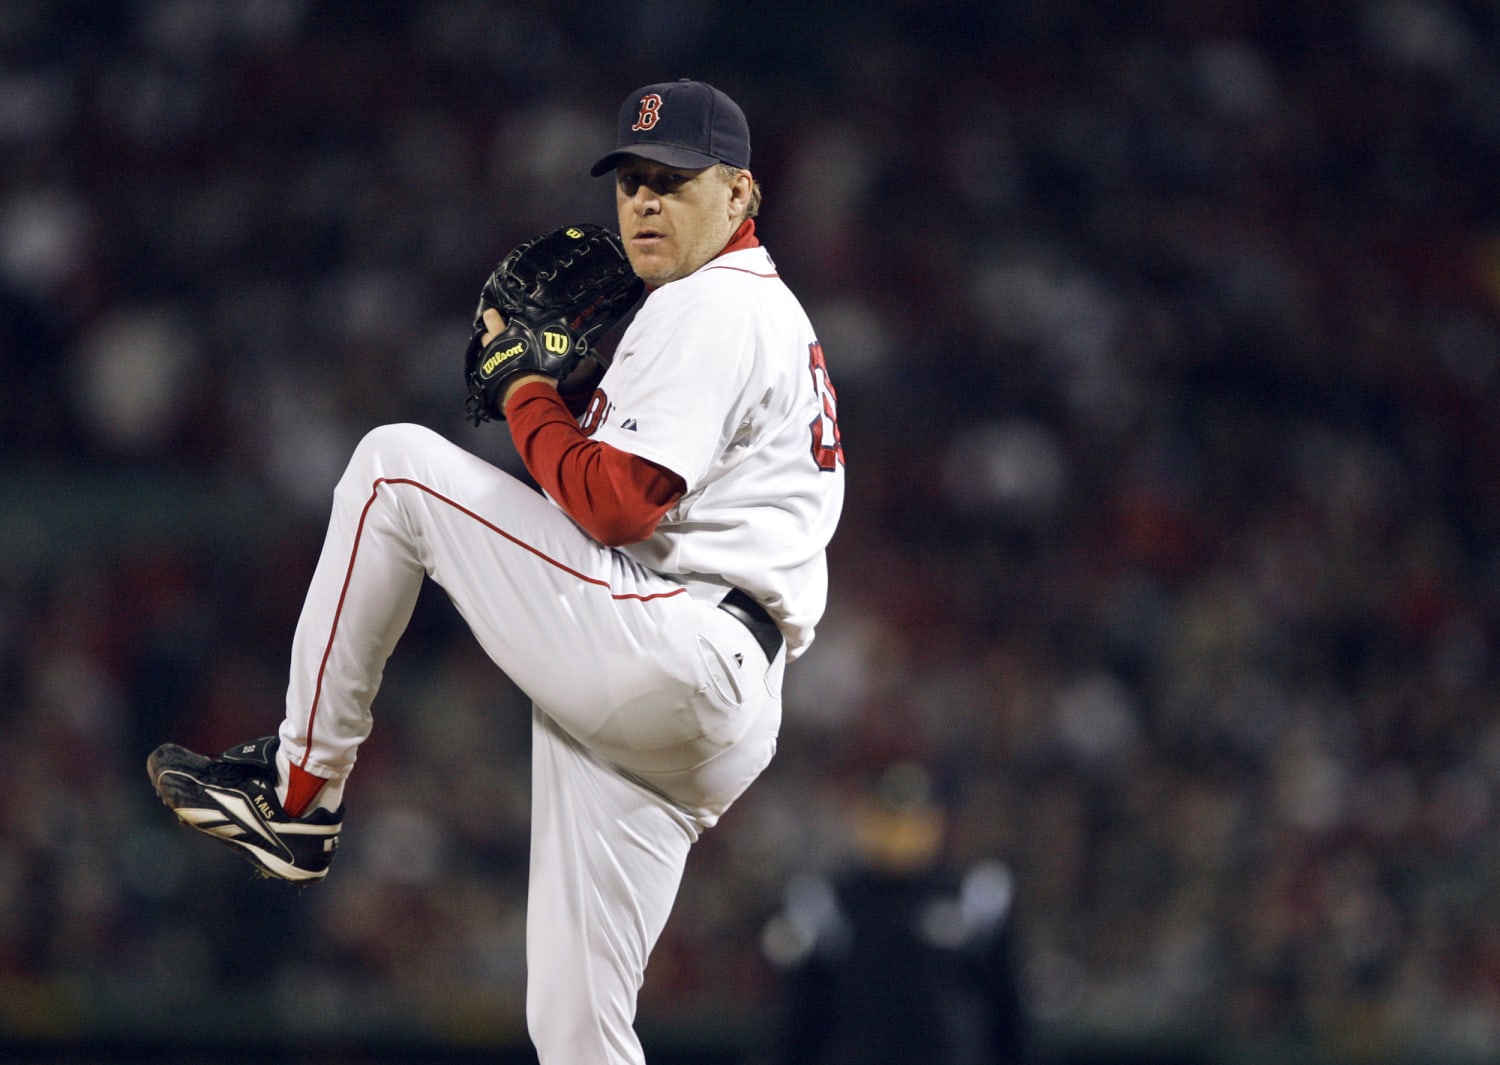 Curt Schilling makes controversial comments about transgender people